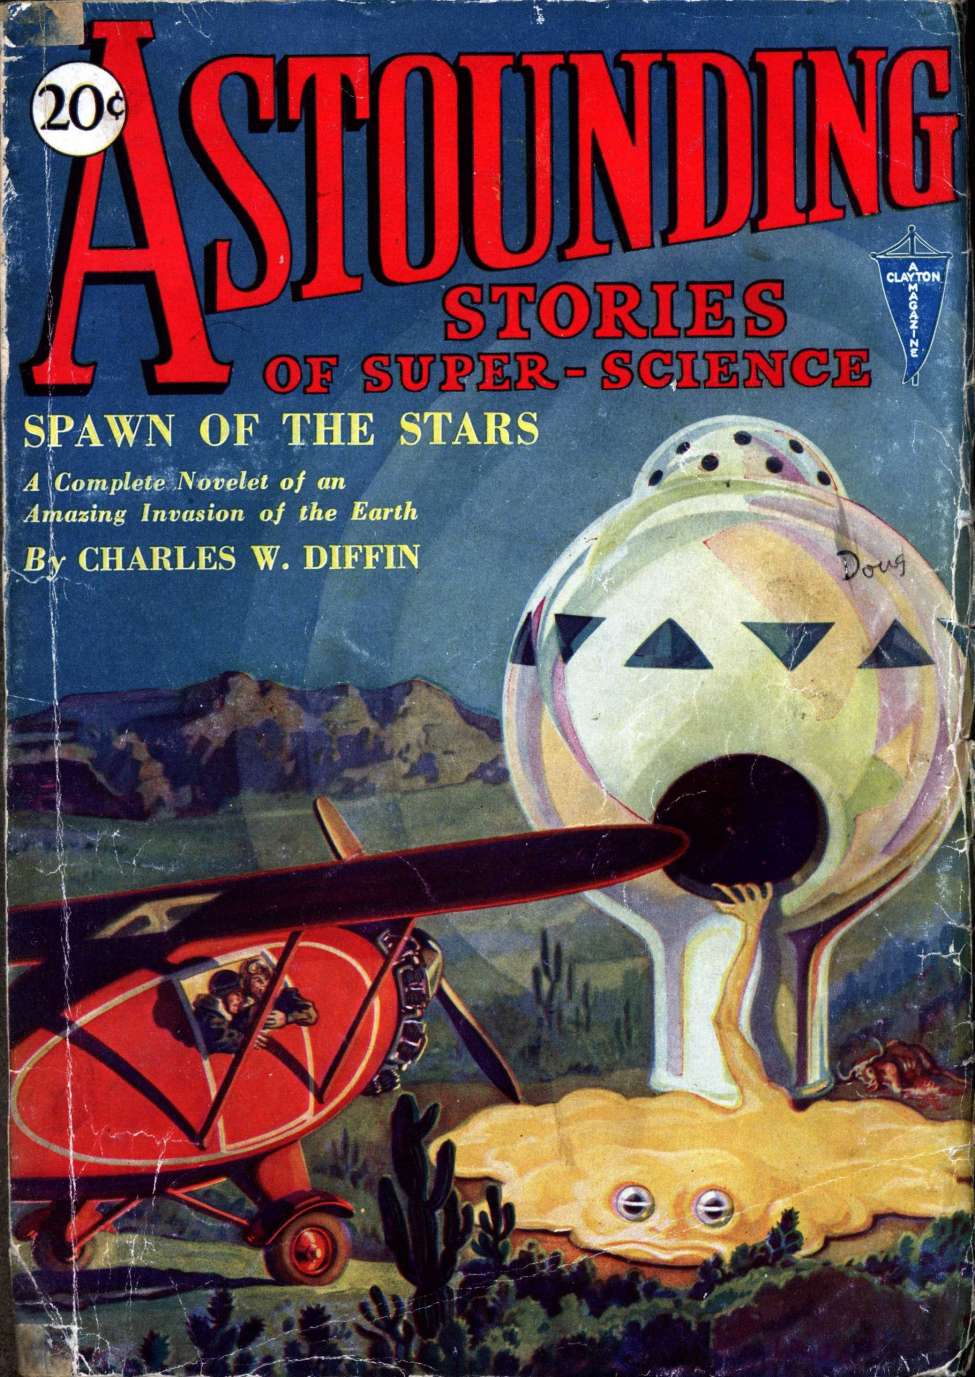 Book Cover For Astounding v1 2 - Spawn of the Stars - Charles W. Diffin